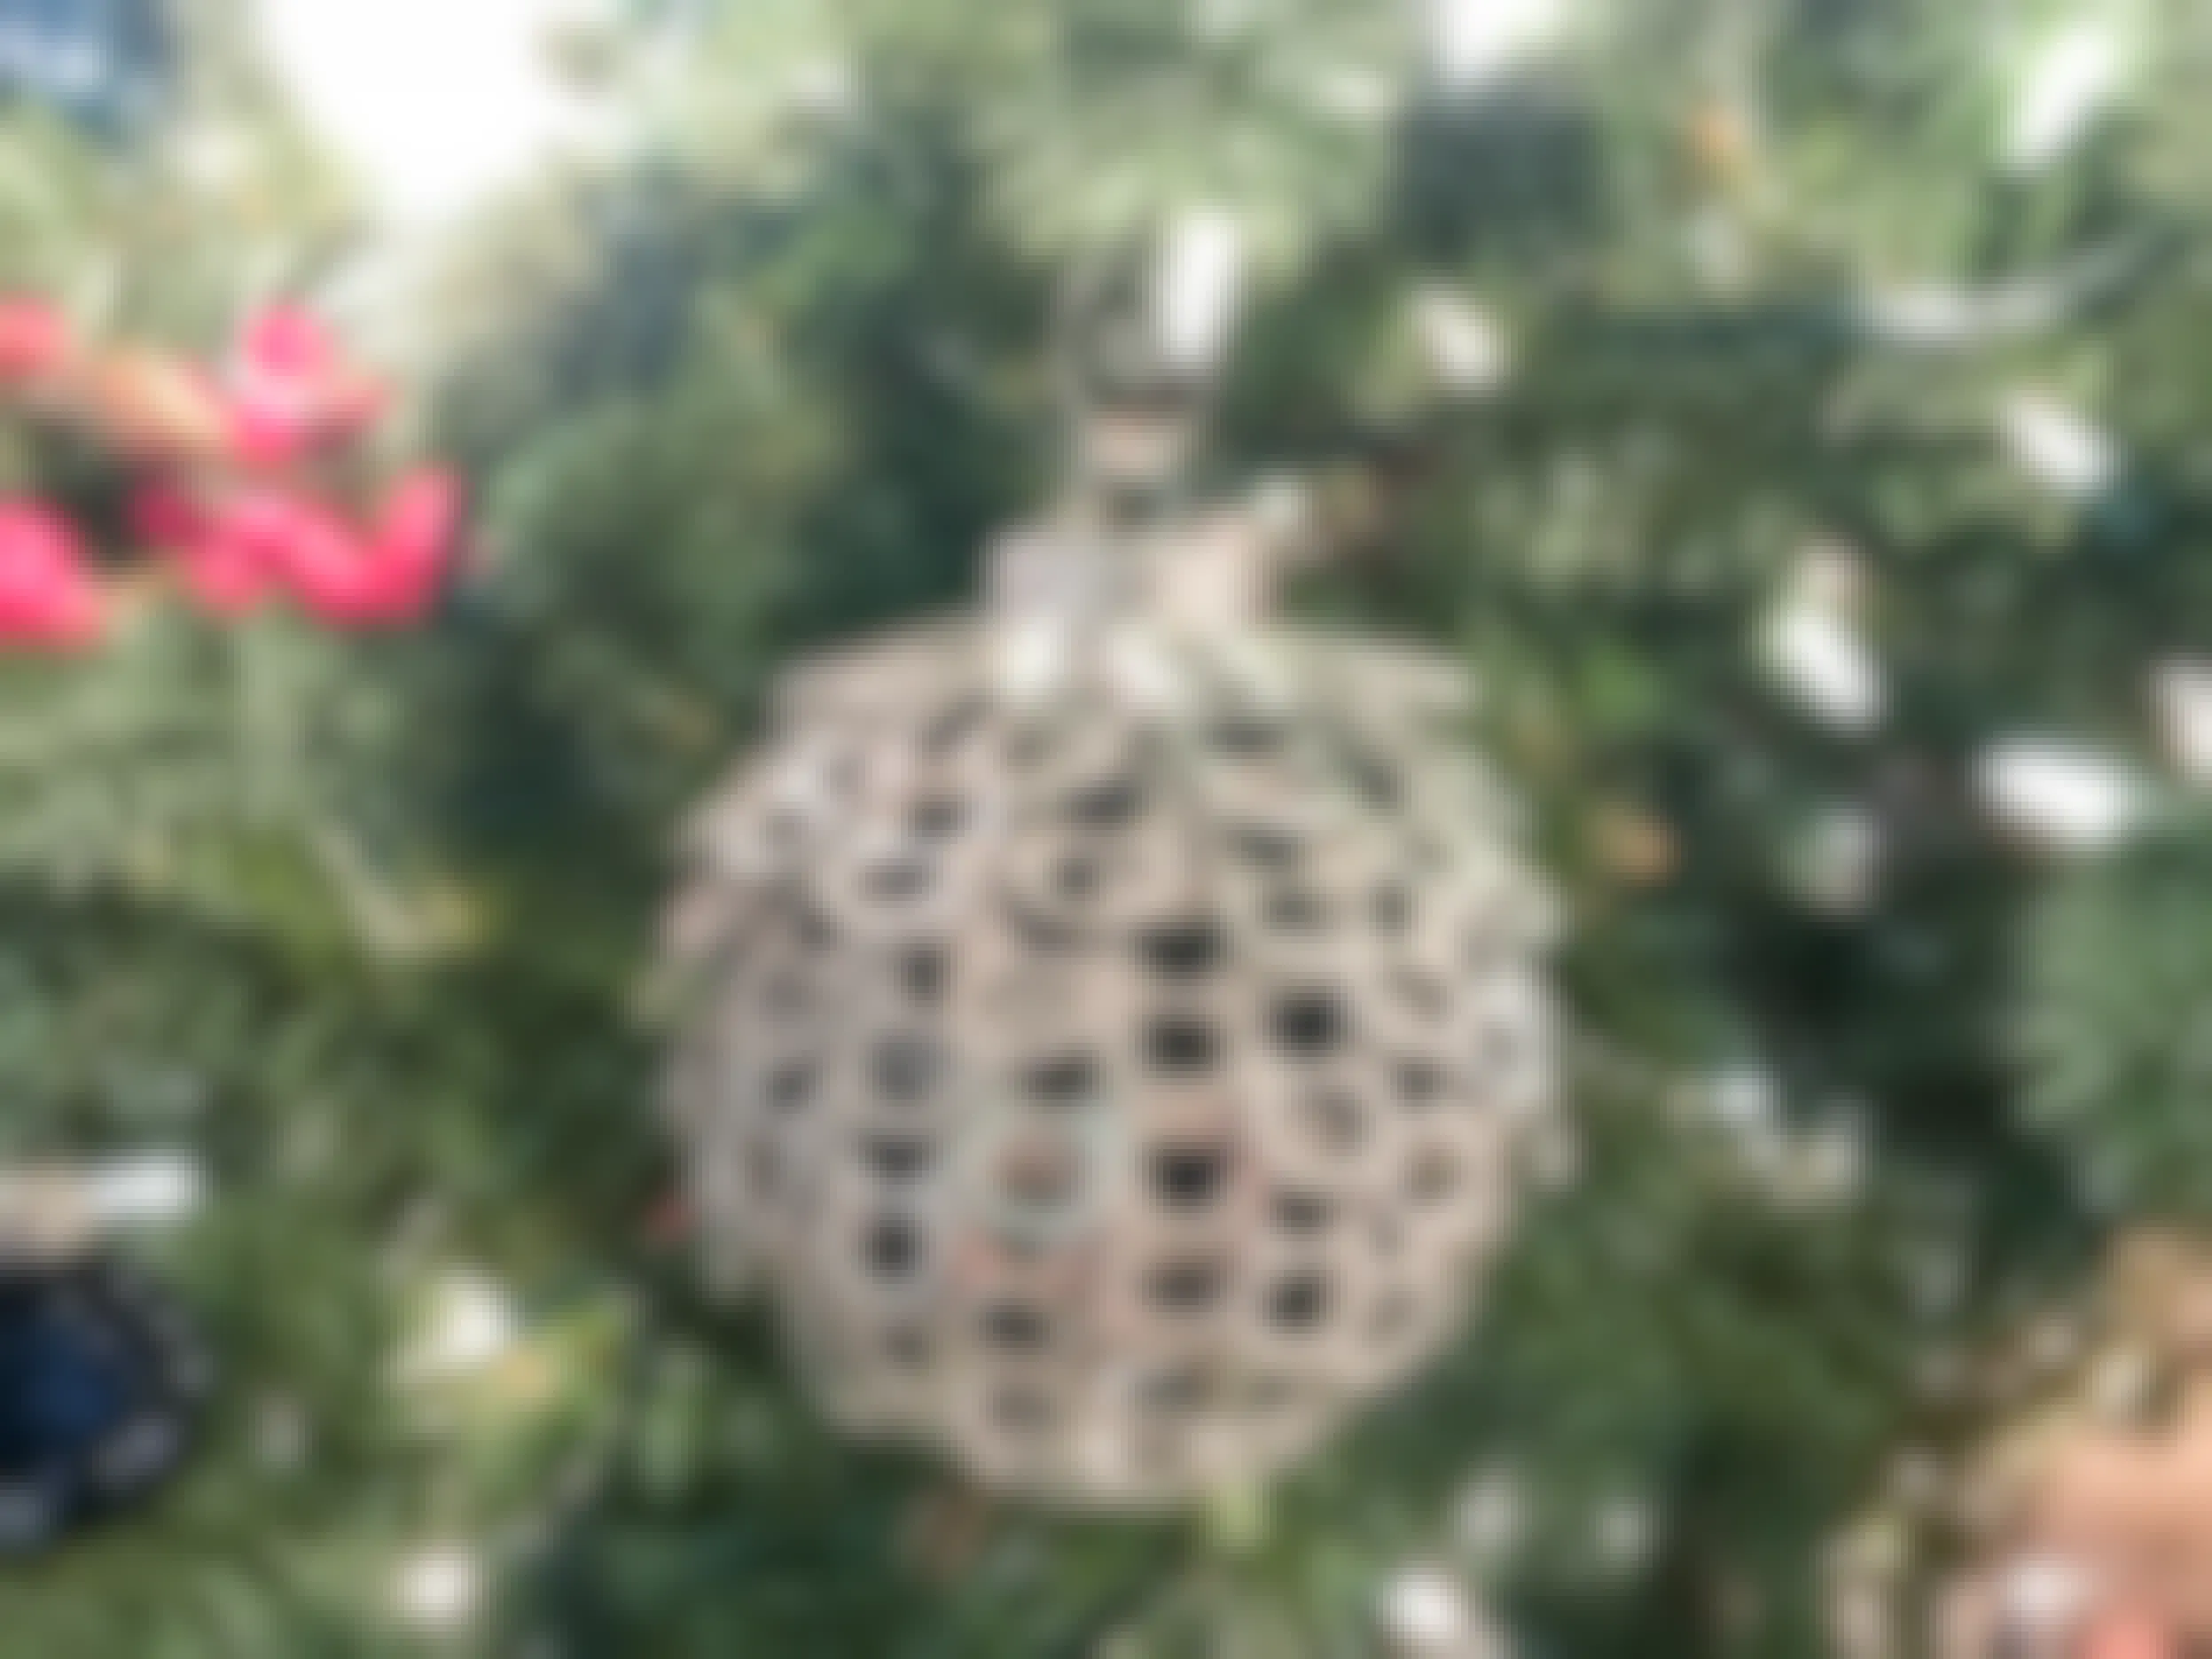 Ornament ball with pop can tabs glued on.